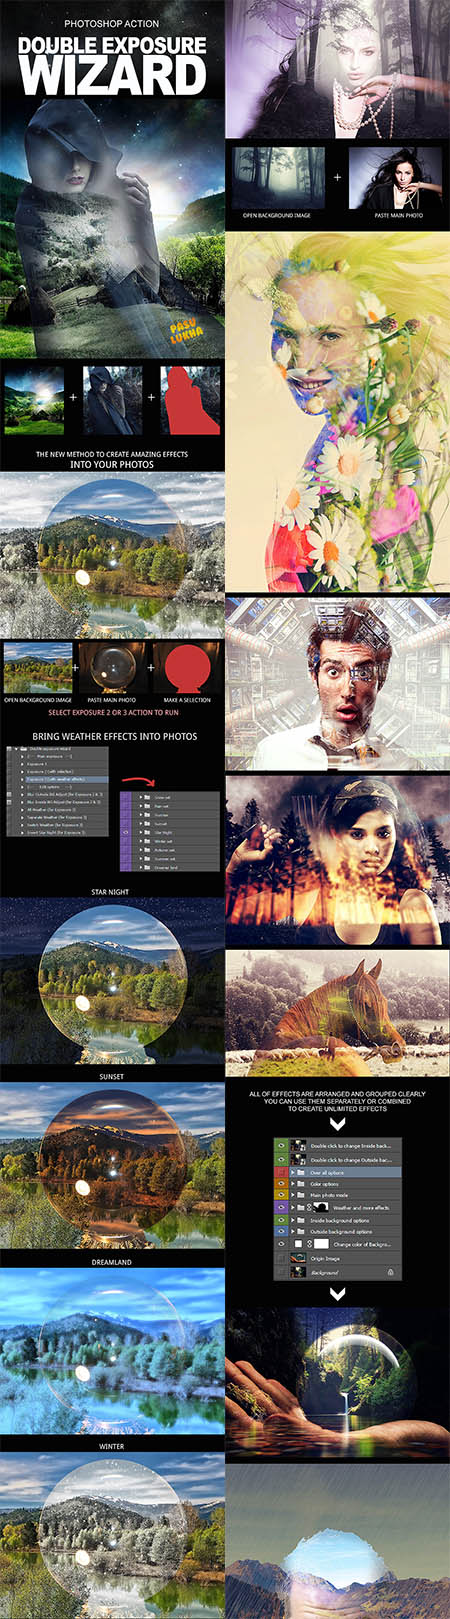 GraphicRiver - Double Exposure Wizard Action 11850742